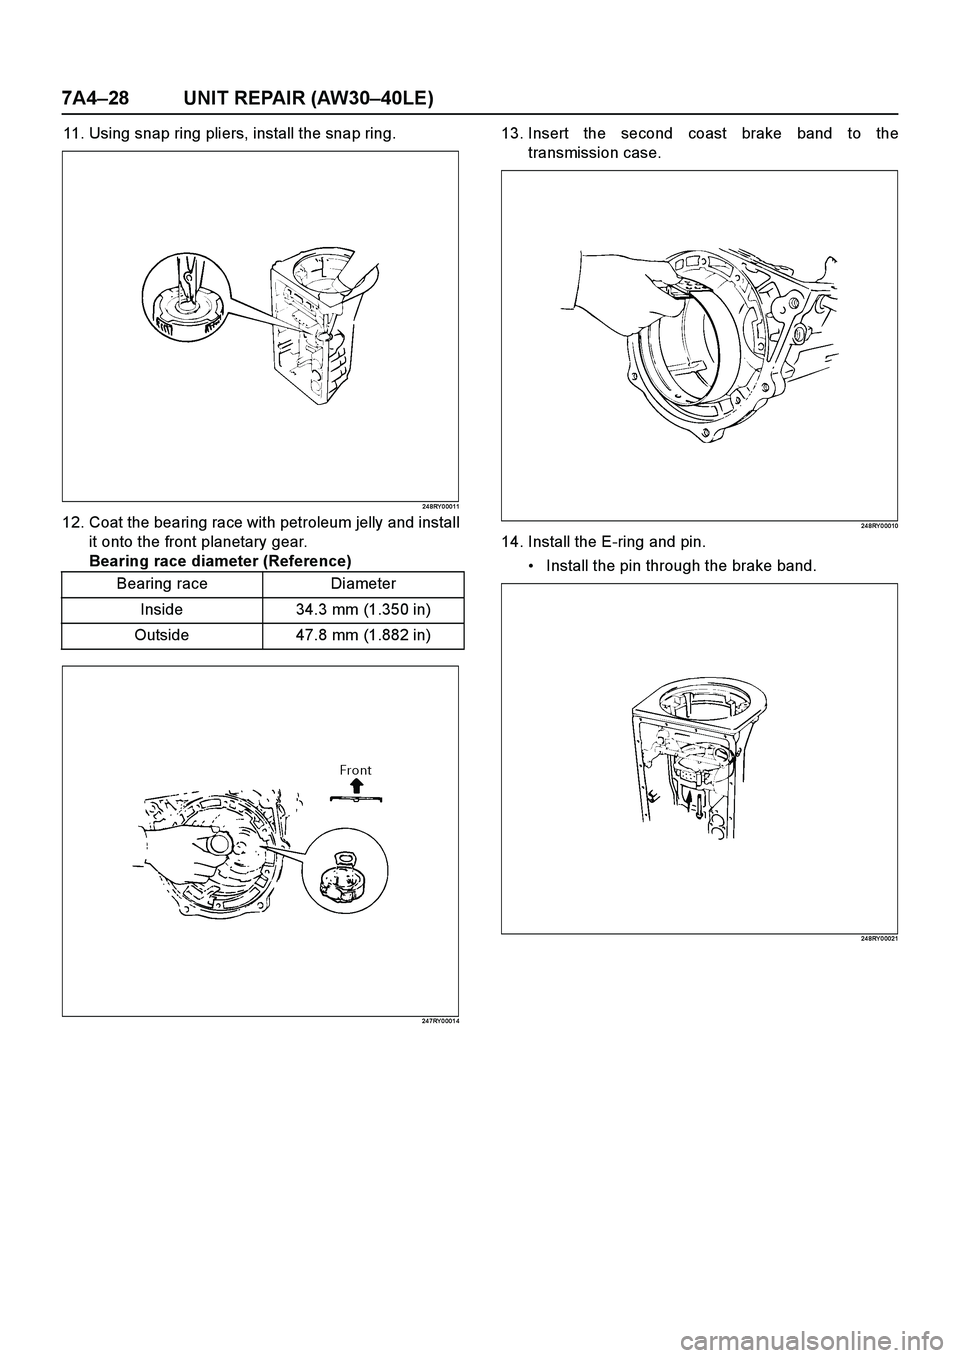 ISUZU TF SERIES 2004  Workshop Manual 7A4–28 UNIT REPAIR (AW30–40LE)
11. Using snap ring pliers, install the snap ring.
24 8RY 0 0011
12. Coat the bearing race with petroleum jelly and install
it onto the front planetary gear.
Bearing